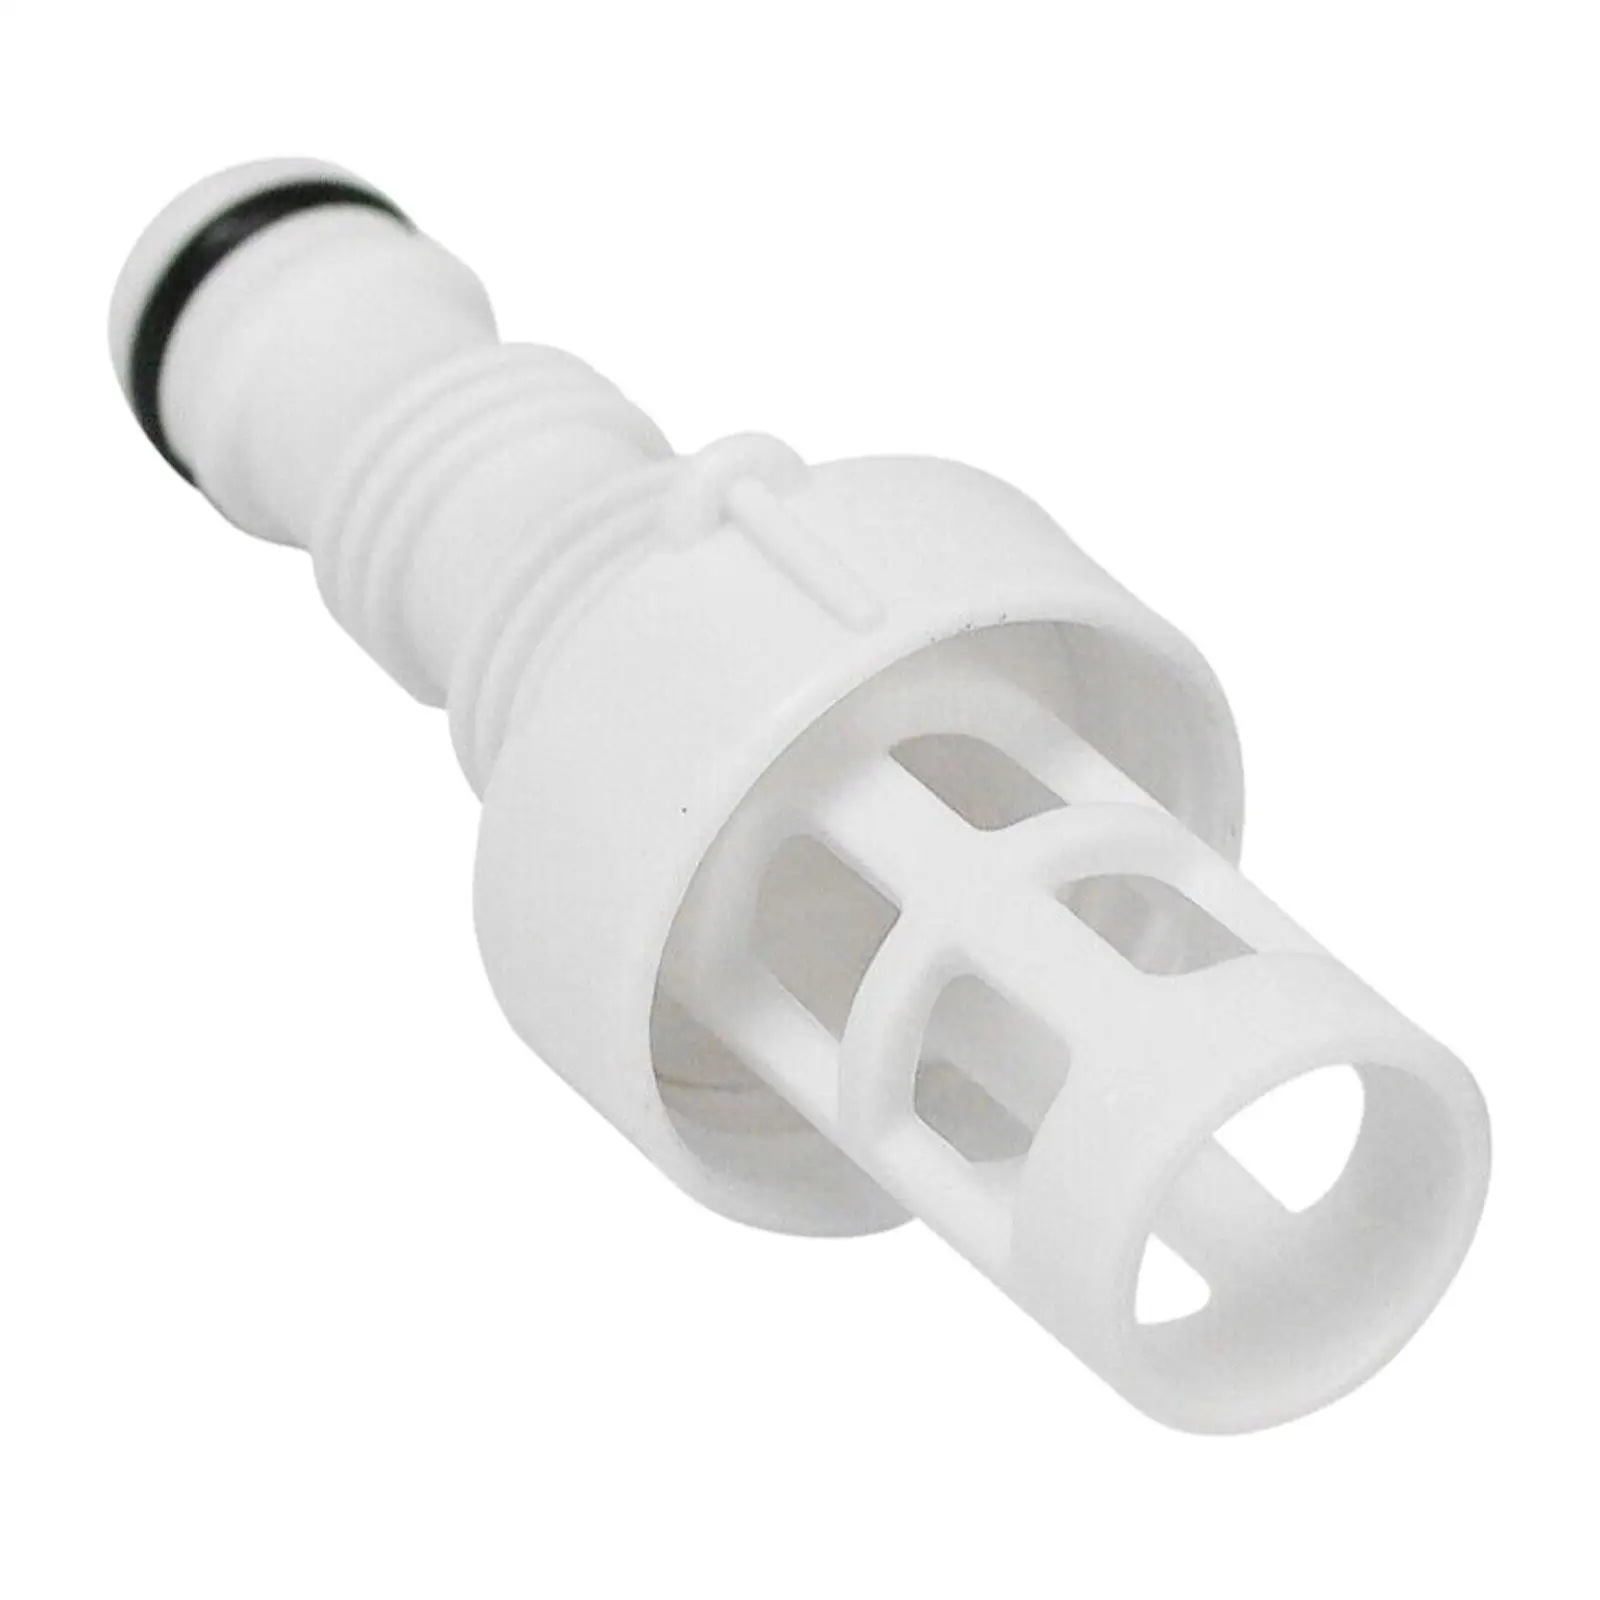 Hose Drain Plug Connector Sturdy Adapter Connection to Drainage Device